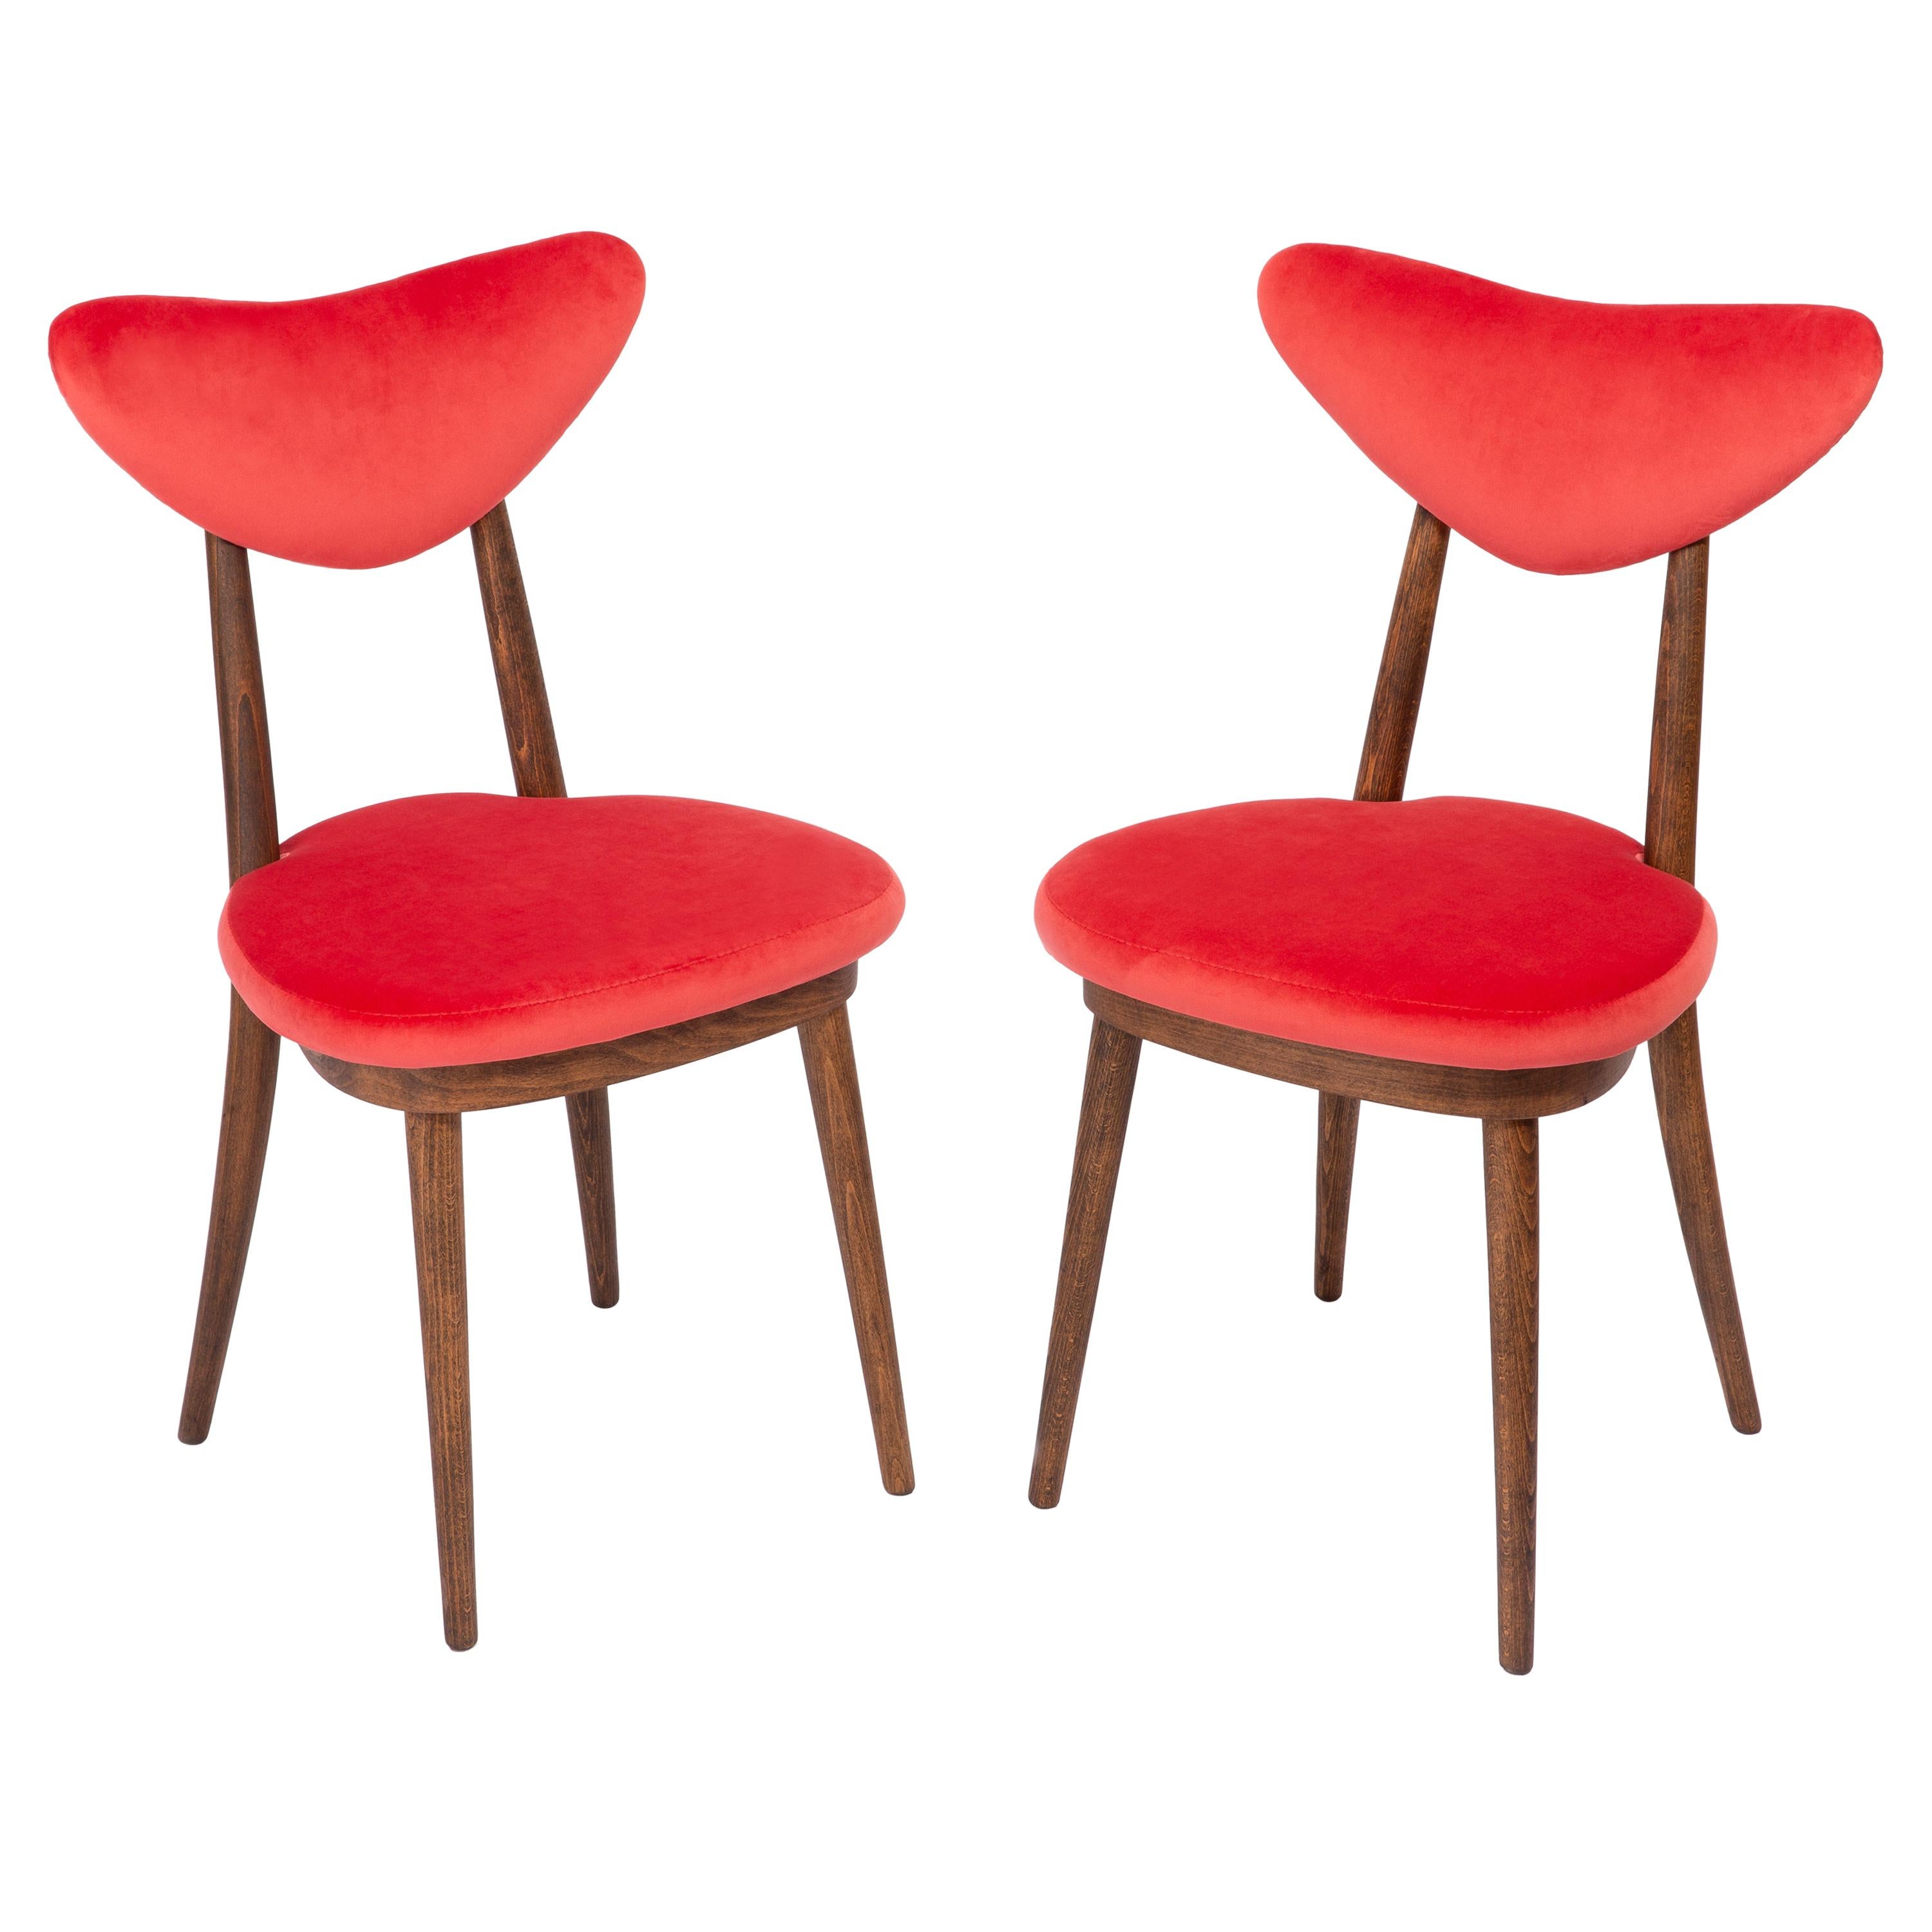 Set of Two Red Heart Chairs, Poland, 1960s For Sale